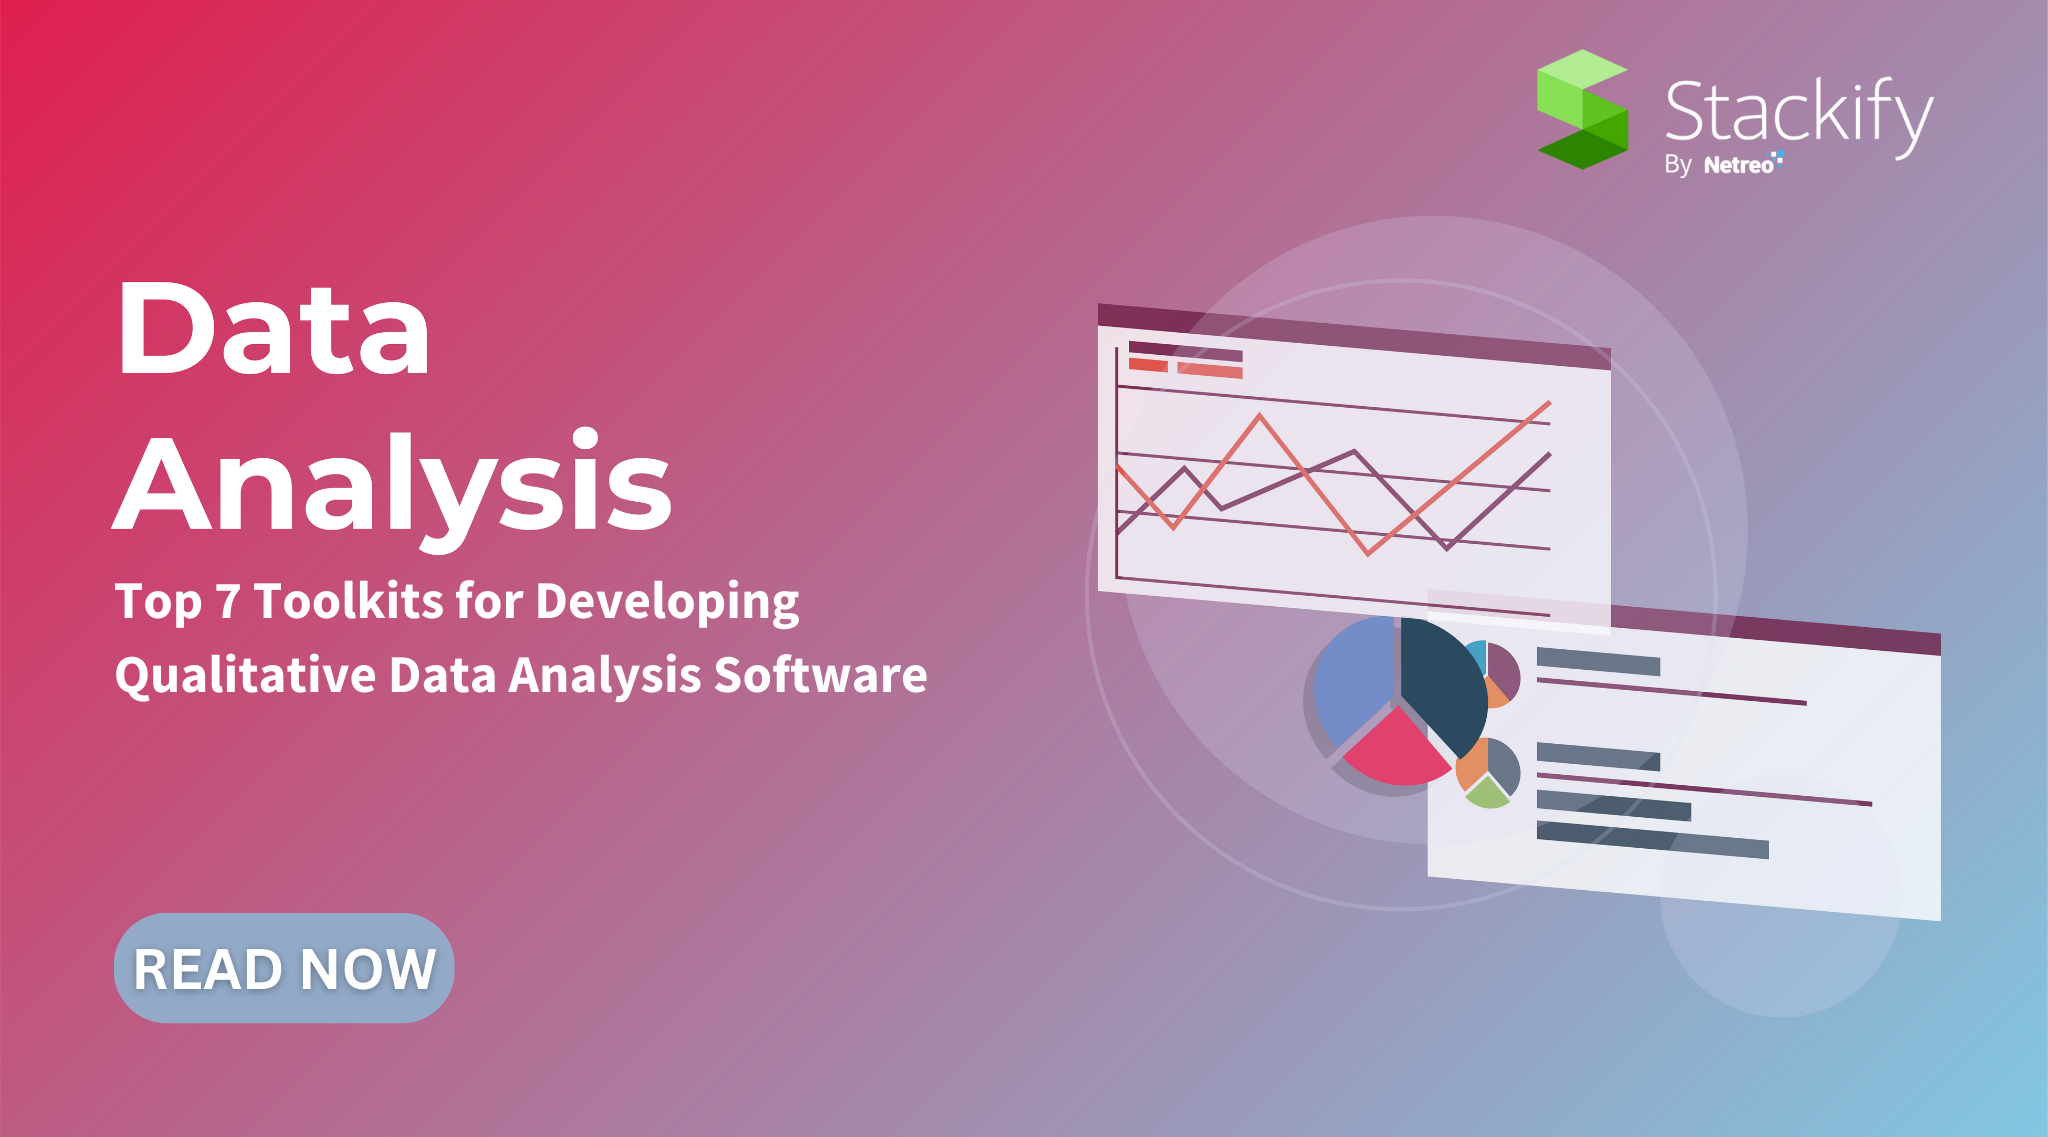 Top 7 Toolkits for Developing Qualitative Data Analysis Software